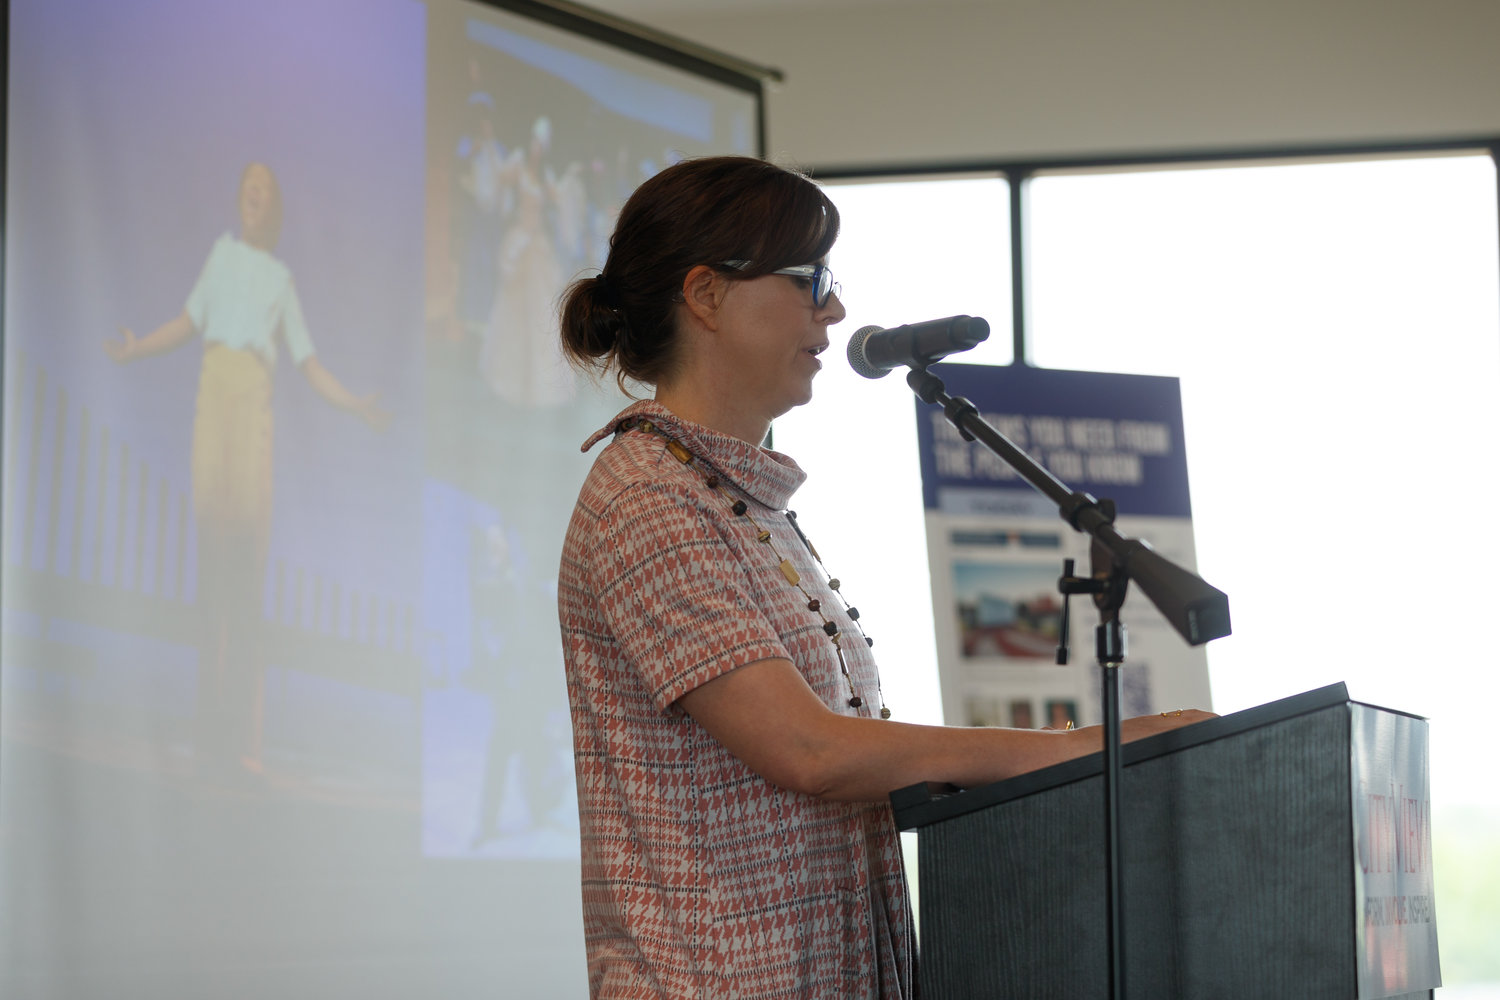 Mary Kate Burke, artistic director at Cape Fear Regional Theatre, talks about the theater's recent renovation and future expansion project during the 2022 CityView Downtown Visionaries Luncheon Wednesday at Segra Stadium.